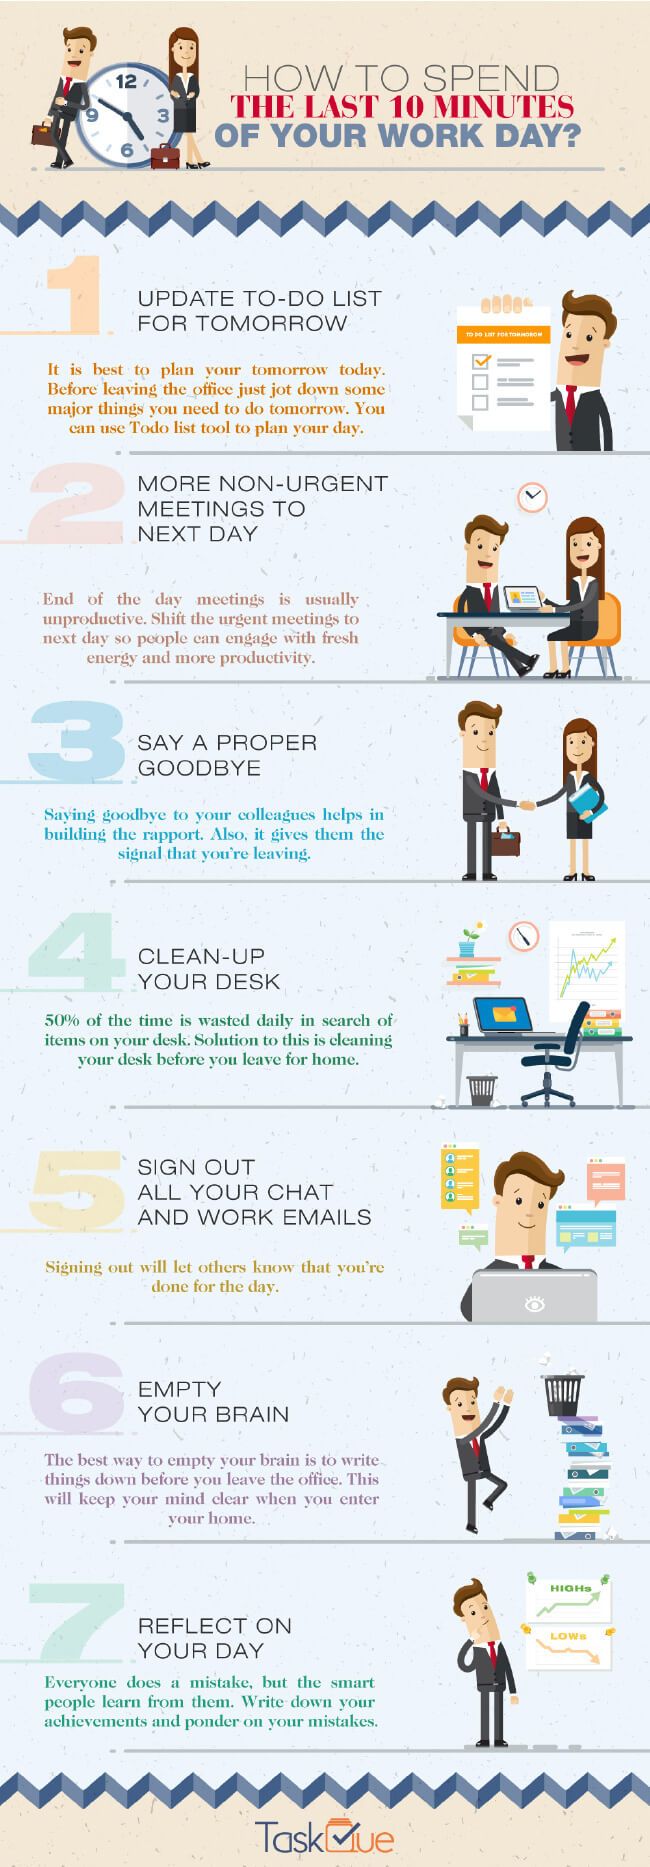 how to reduce stress by powering your time at work the last 10 minutes. tipsographic main